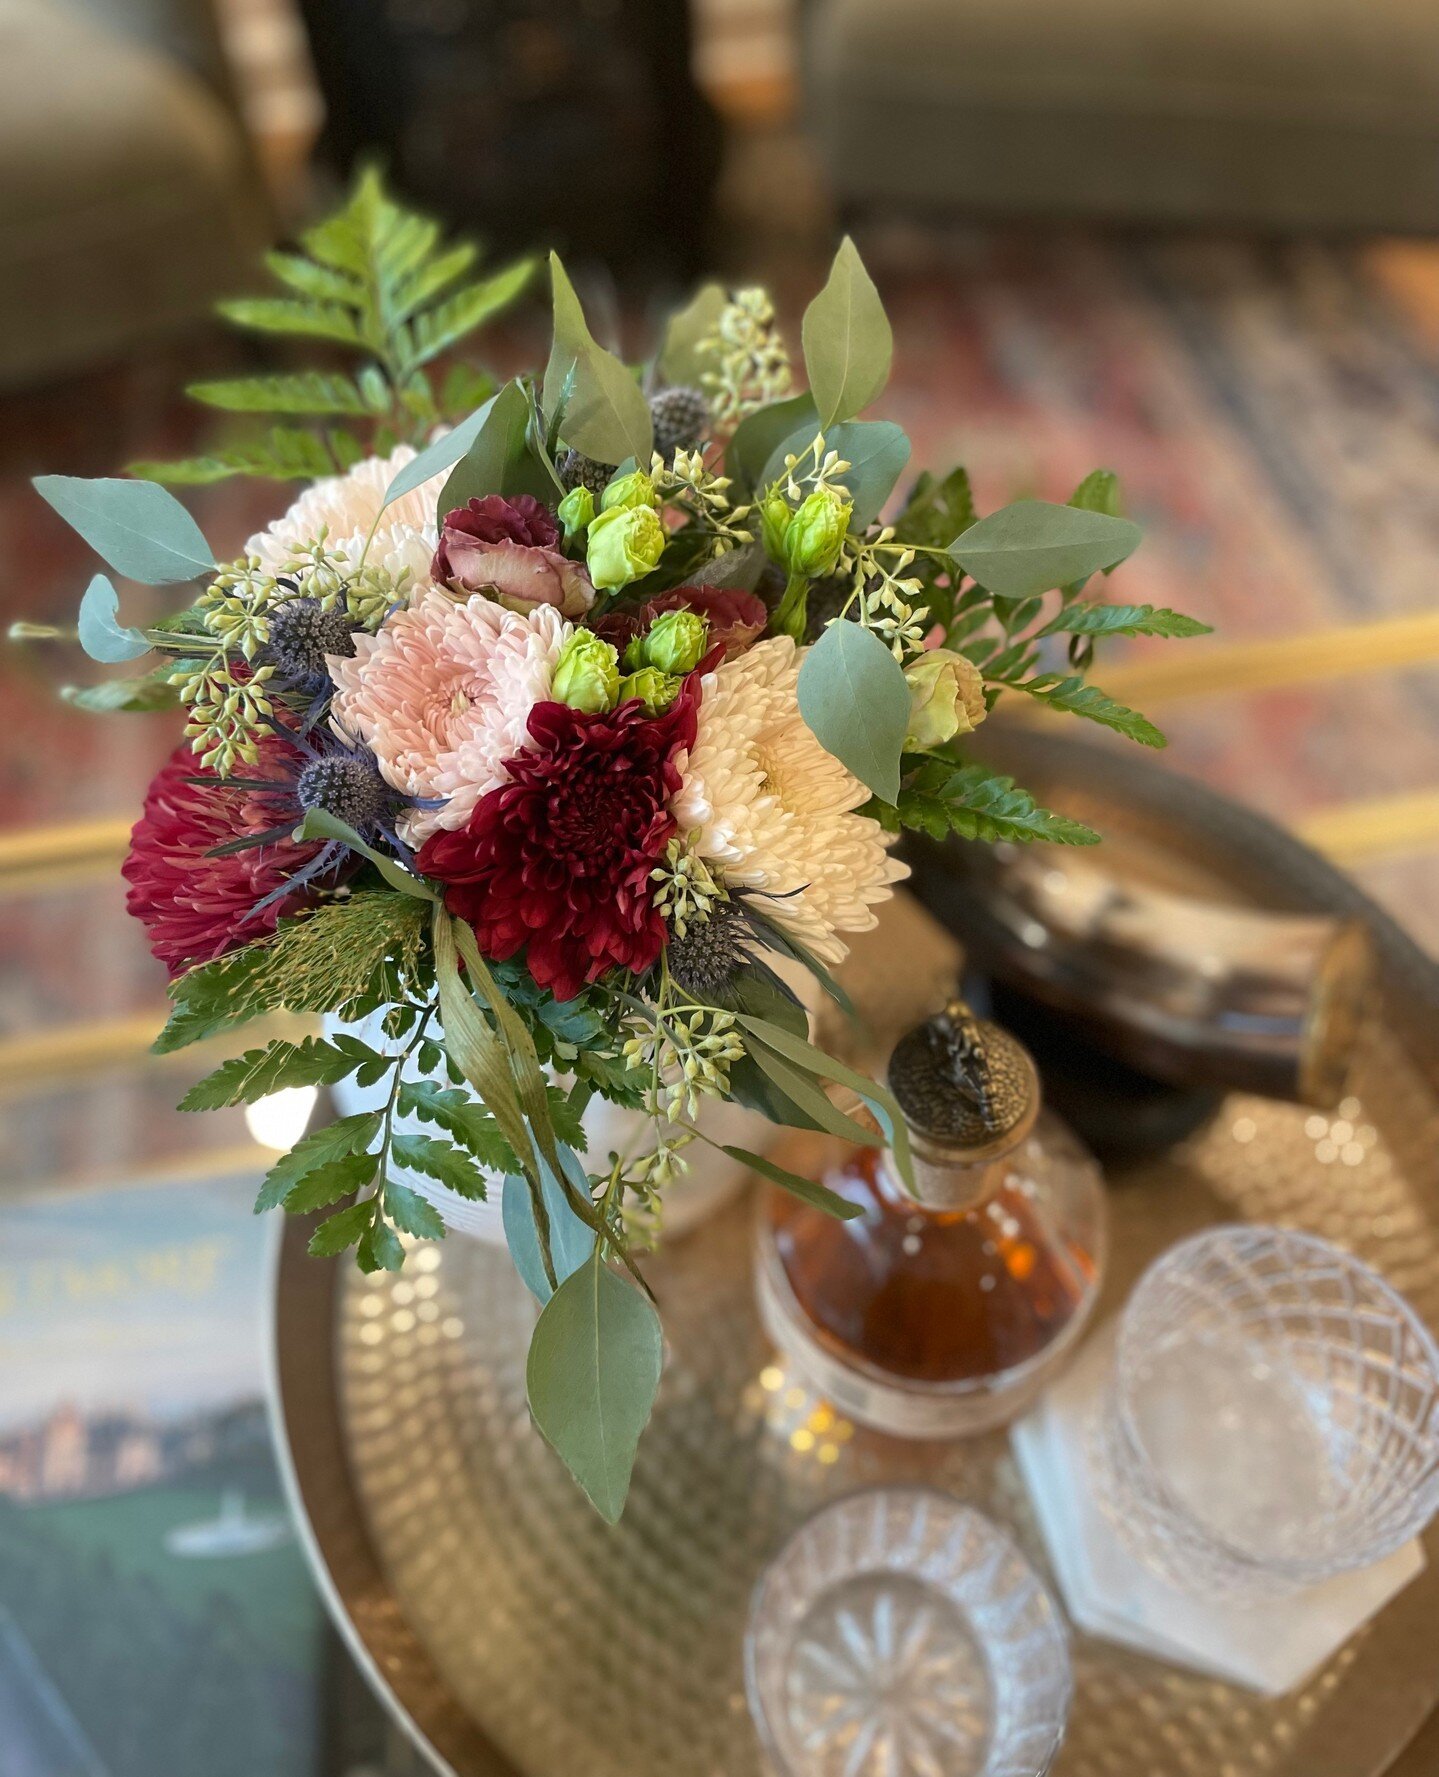 Recently I met the floral designer and owner of @ladybirdblooms (isn't this a super fun business name). Her floral arrangements are beautifully curated for fall and I purchased a bouquet for my home. After one week, these flowers are still going stro